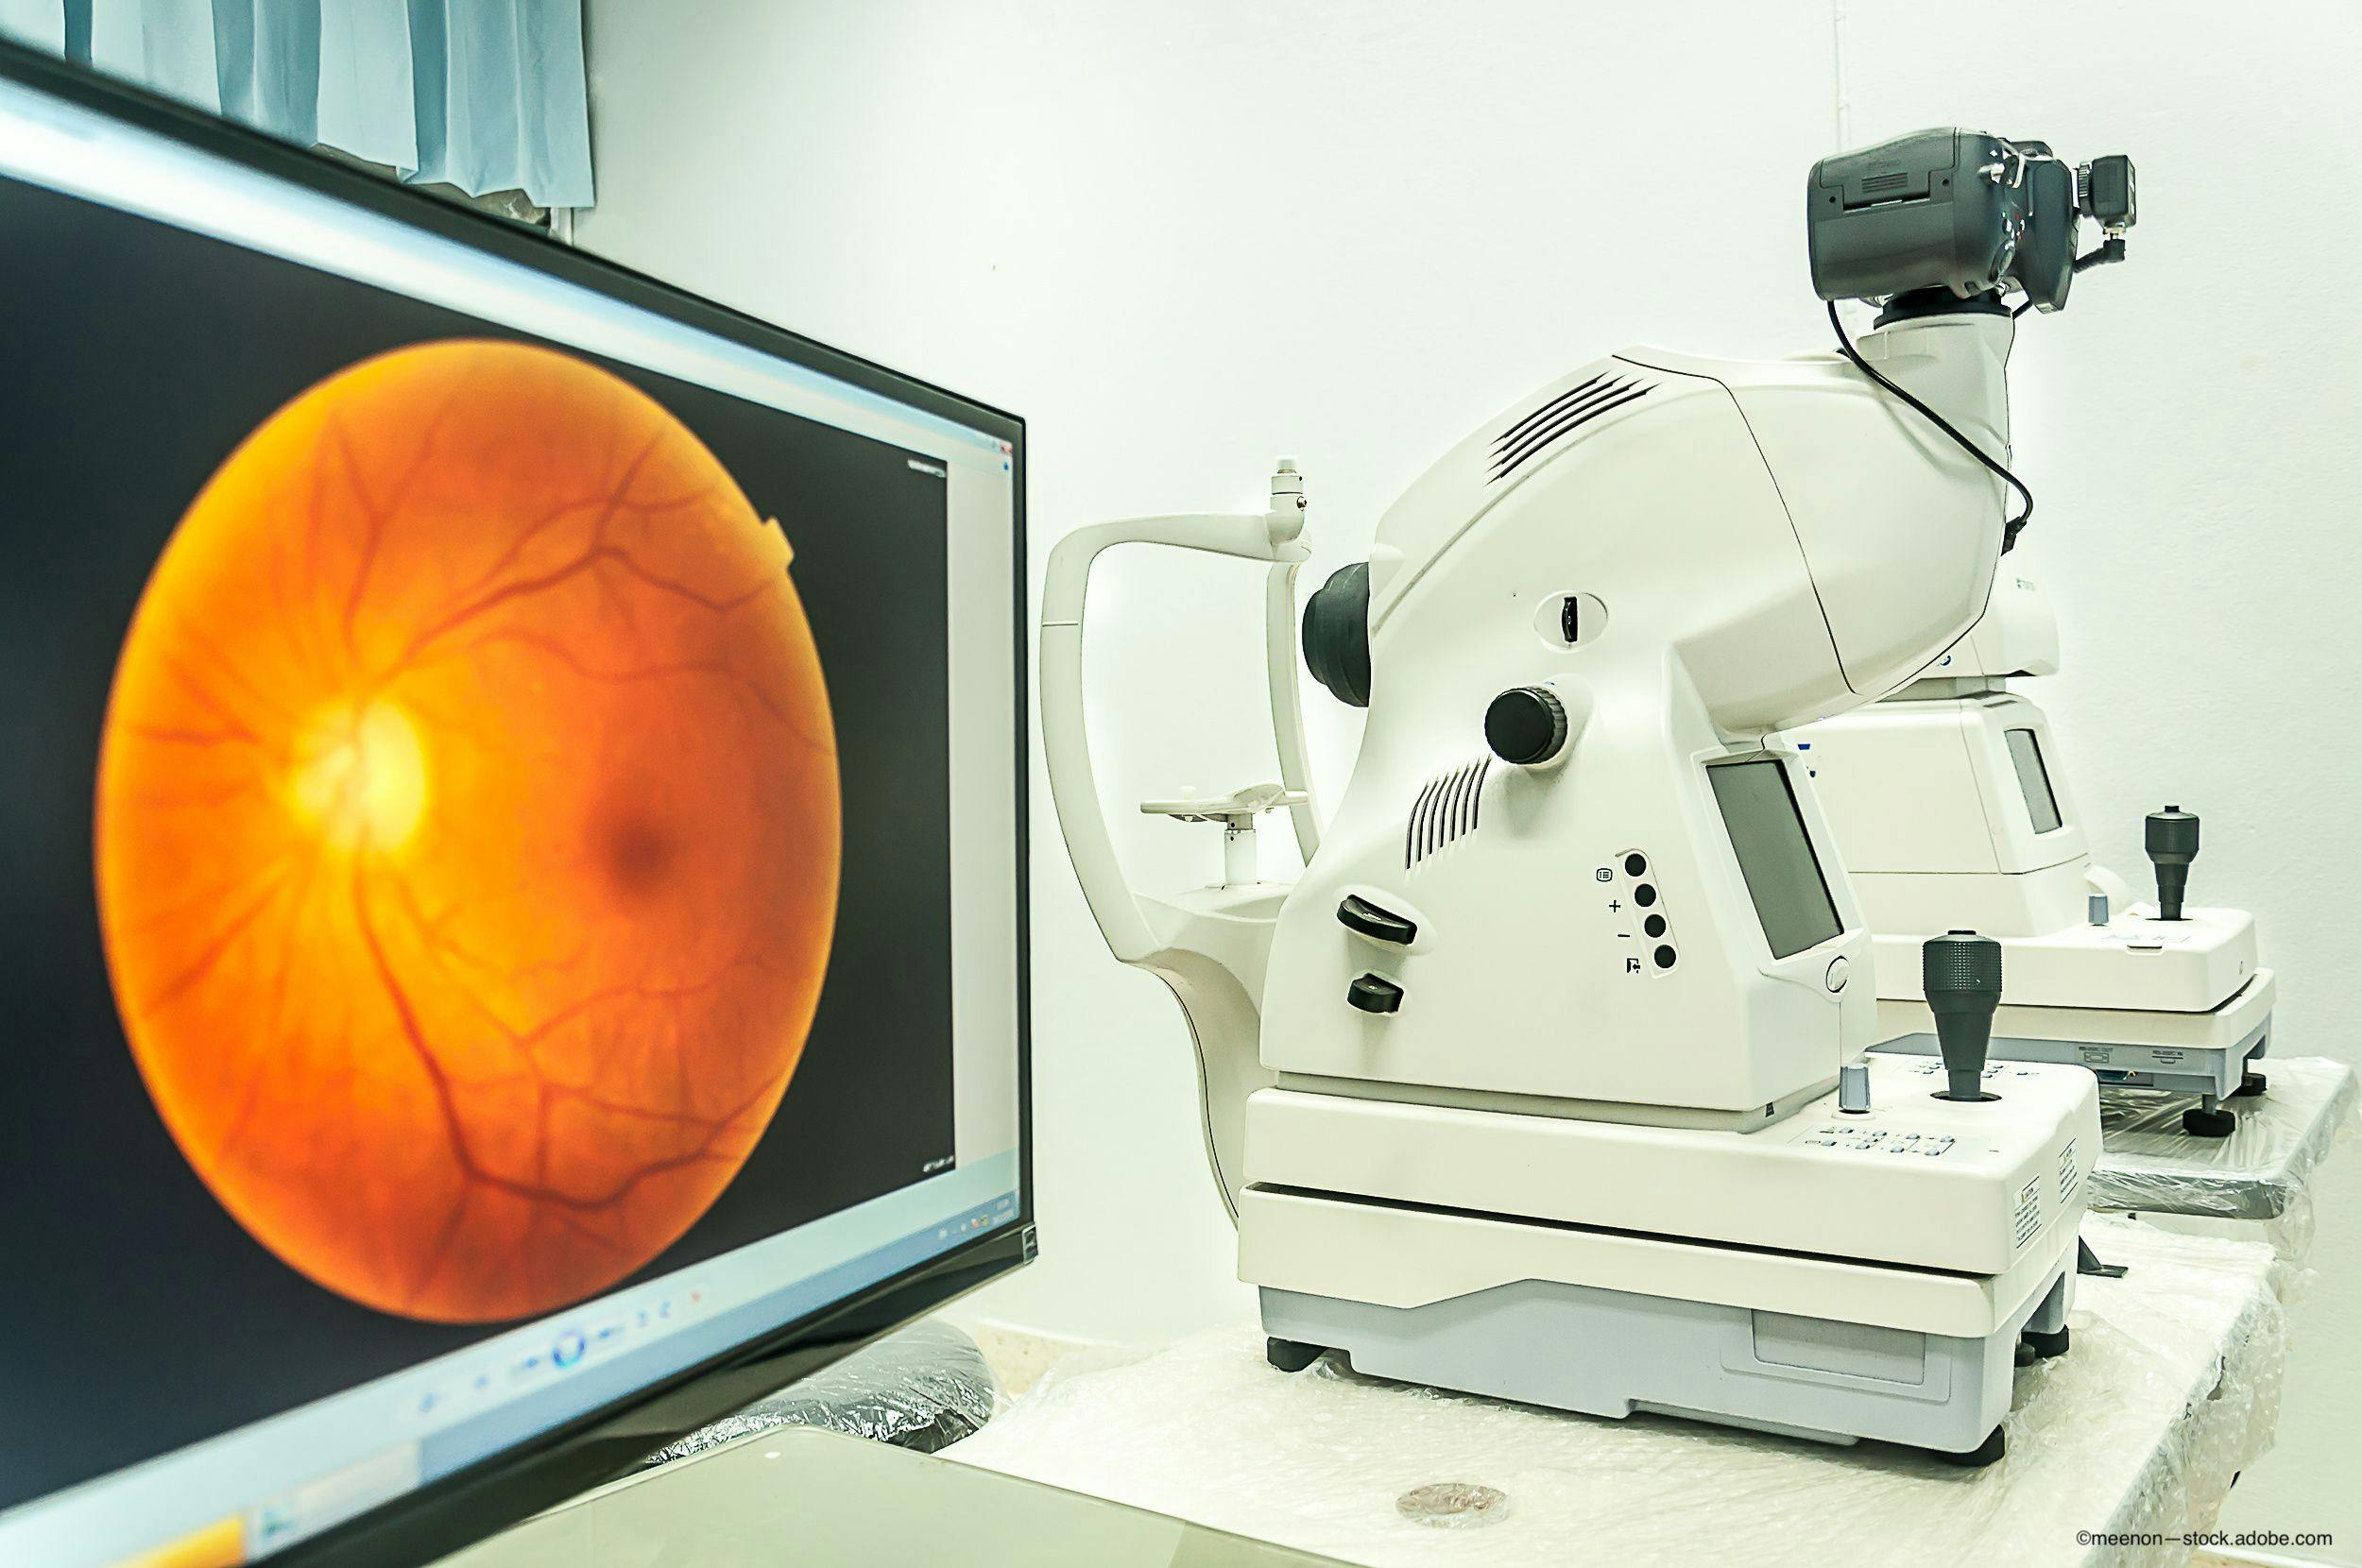 Dry AMD treatment facilitated by swept-source OCT imaging